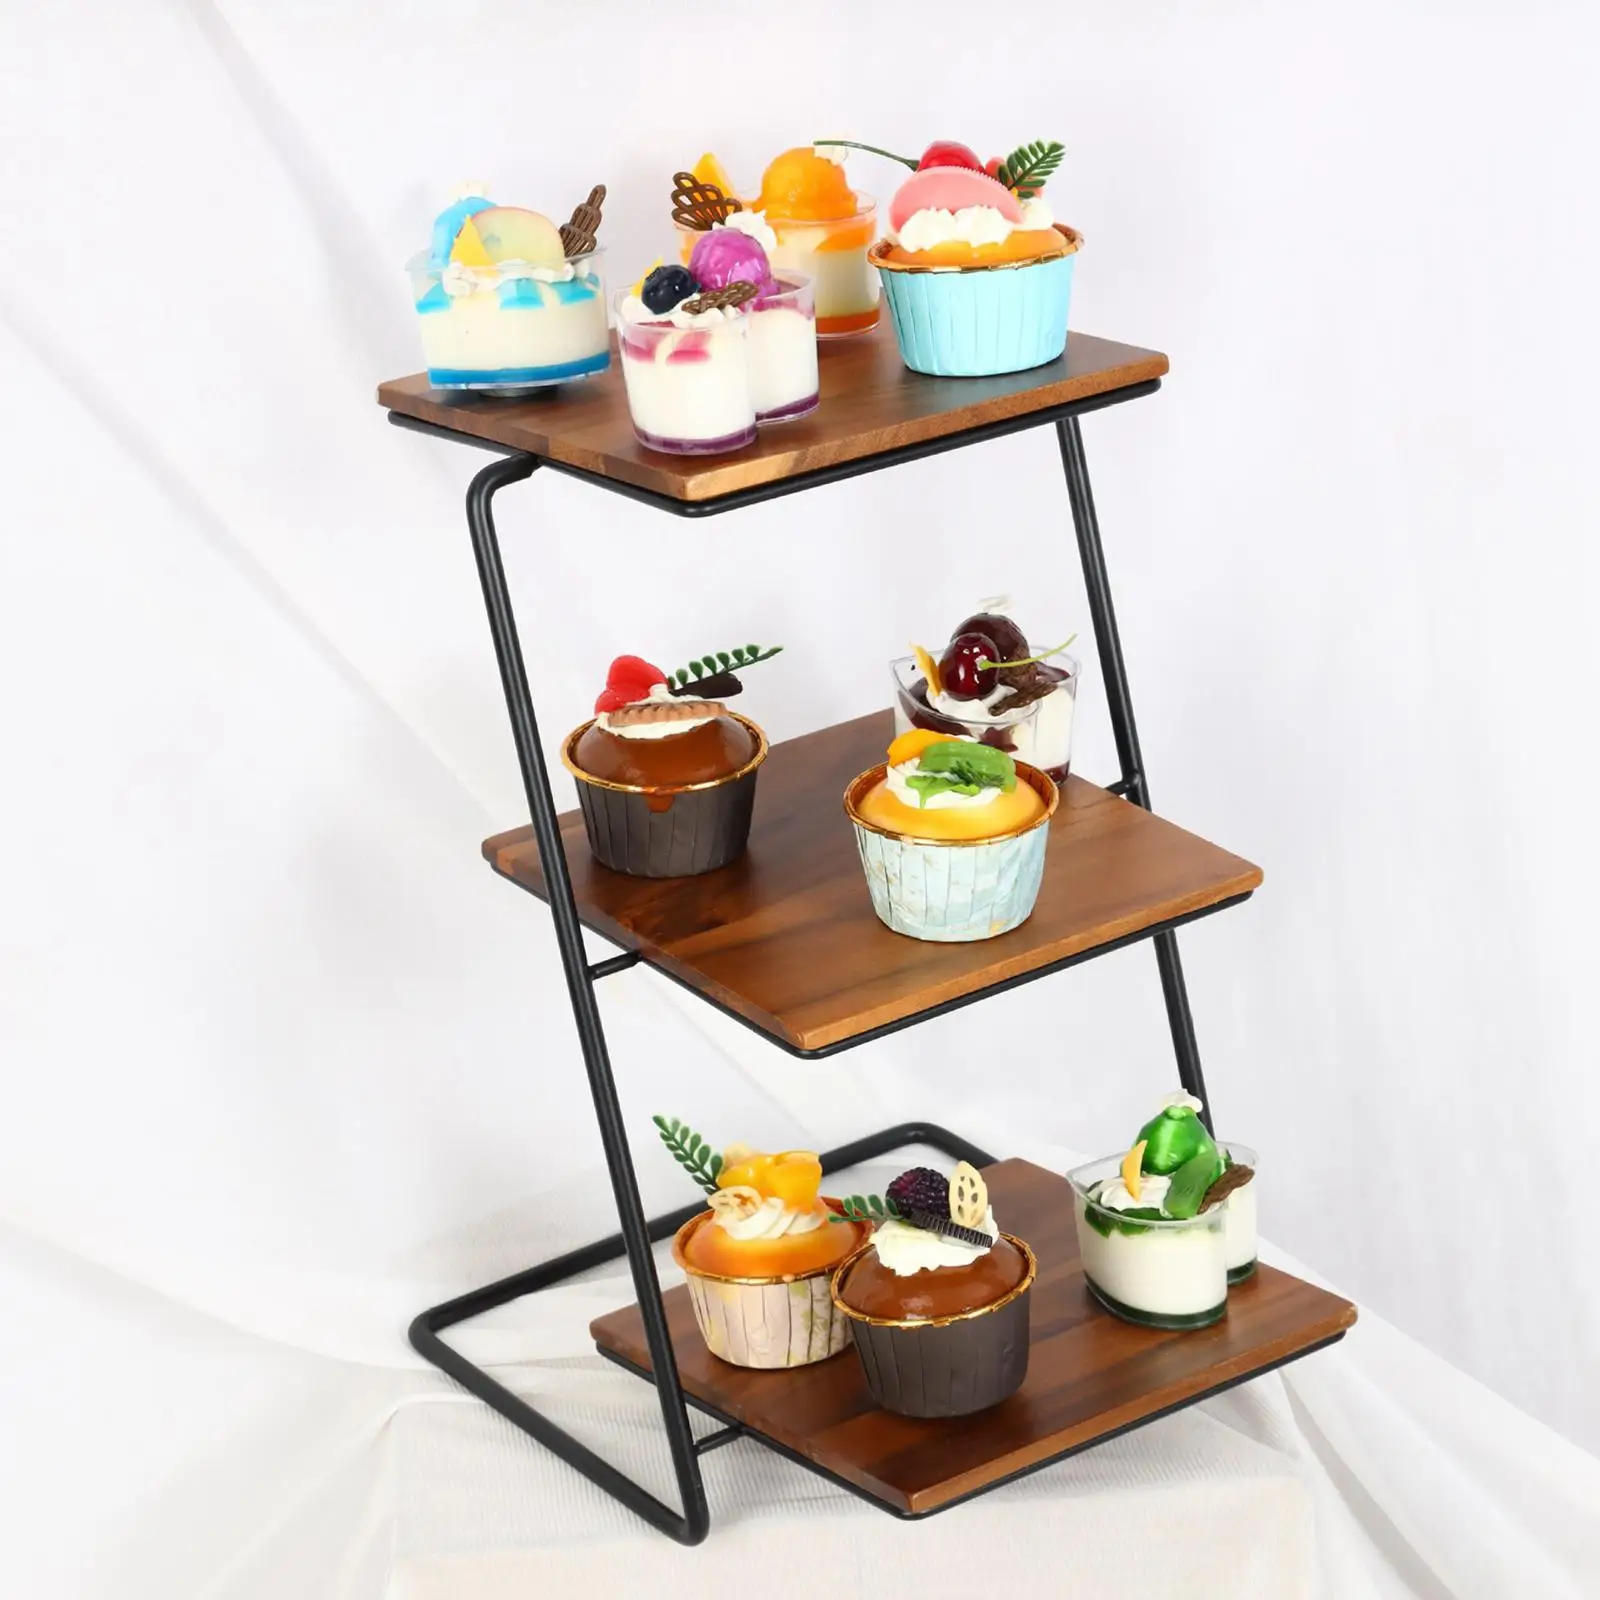 Japanese Style Cake Stand Fruit Dessert Plate 3rd Dish Clay Pedestal for Holiday Party Decorations Home Decor Sturdy